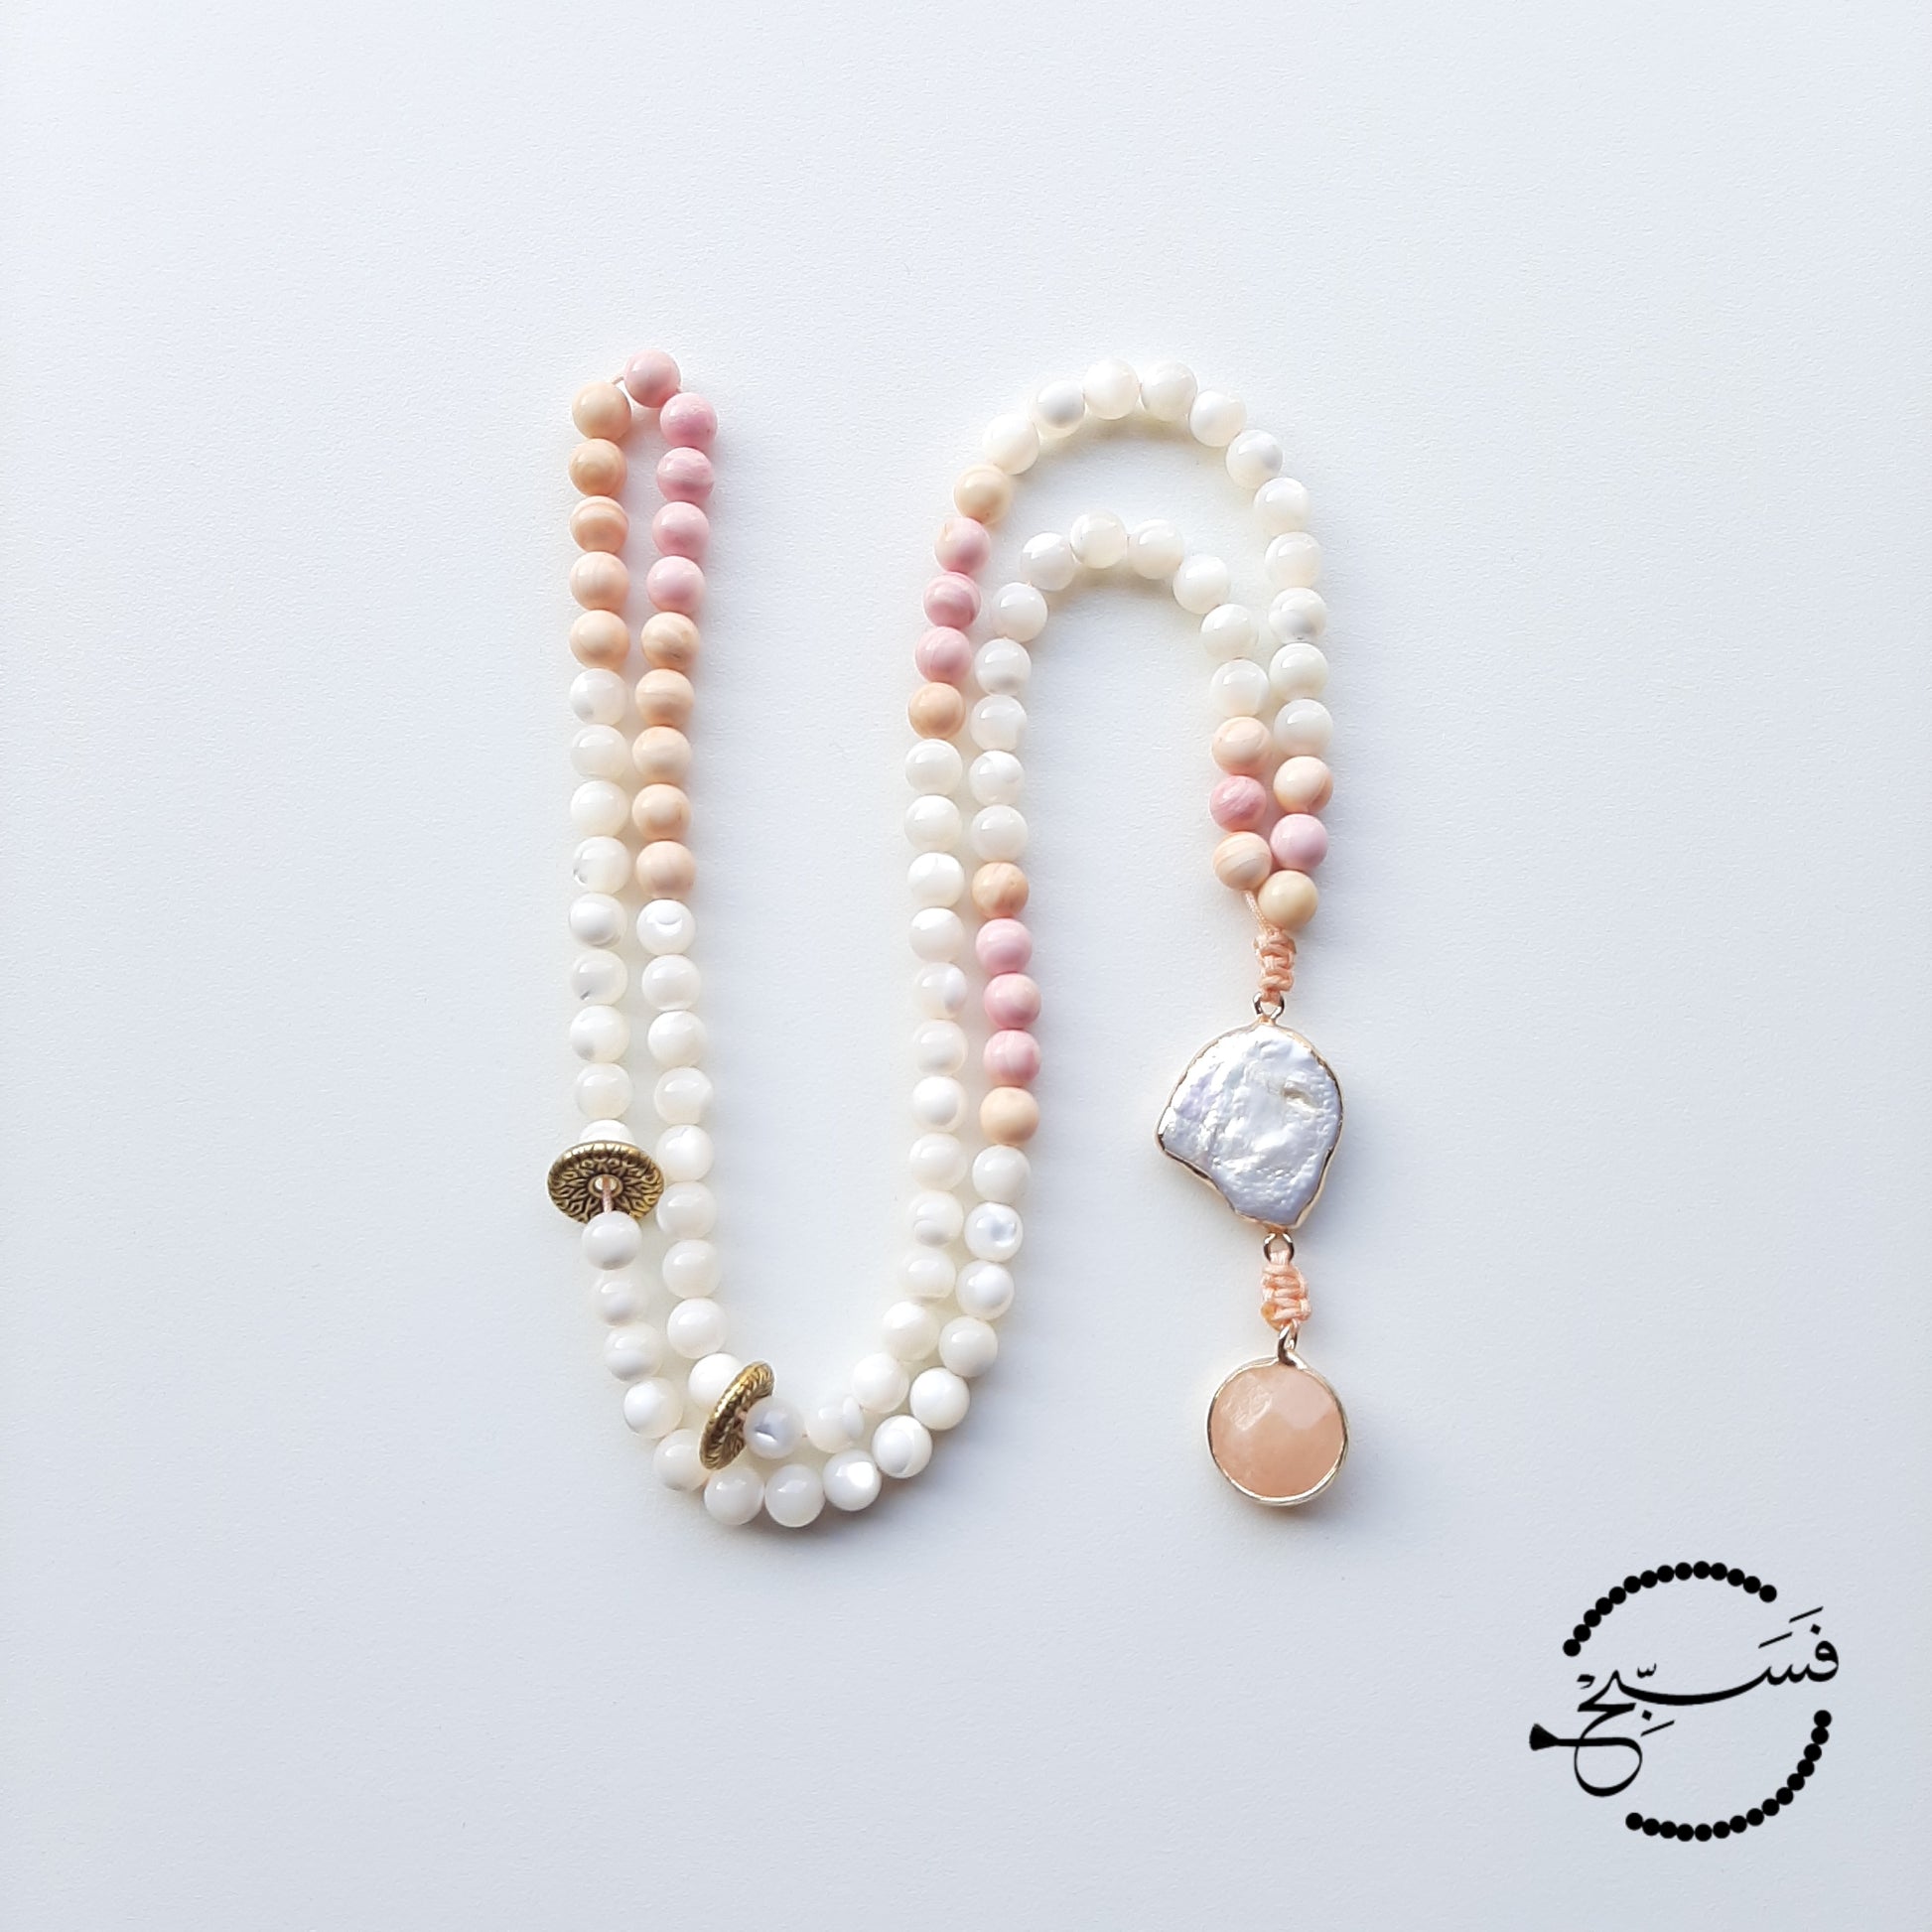 Natural trochus shell beads, pink and peach tridacna shell beads, a freshwater pearl pendant and a mini jasper pendant are used in this unique design.  Packaged in a luxurious pouch and a gift box.  99 beads